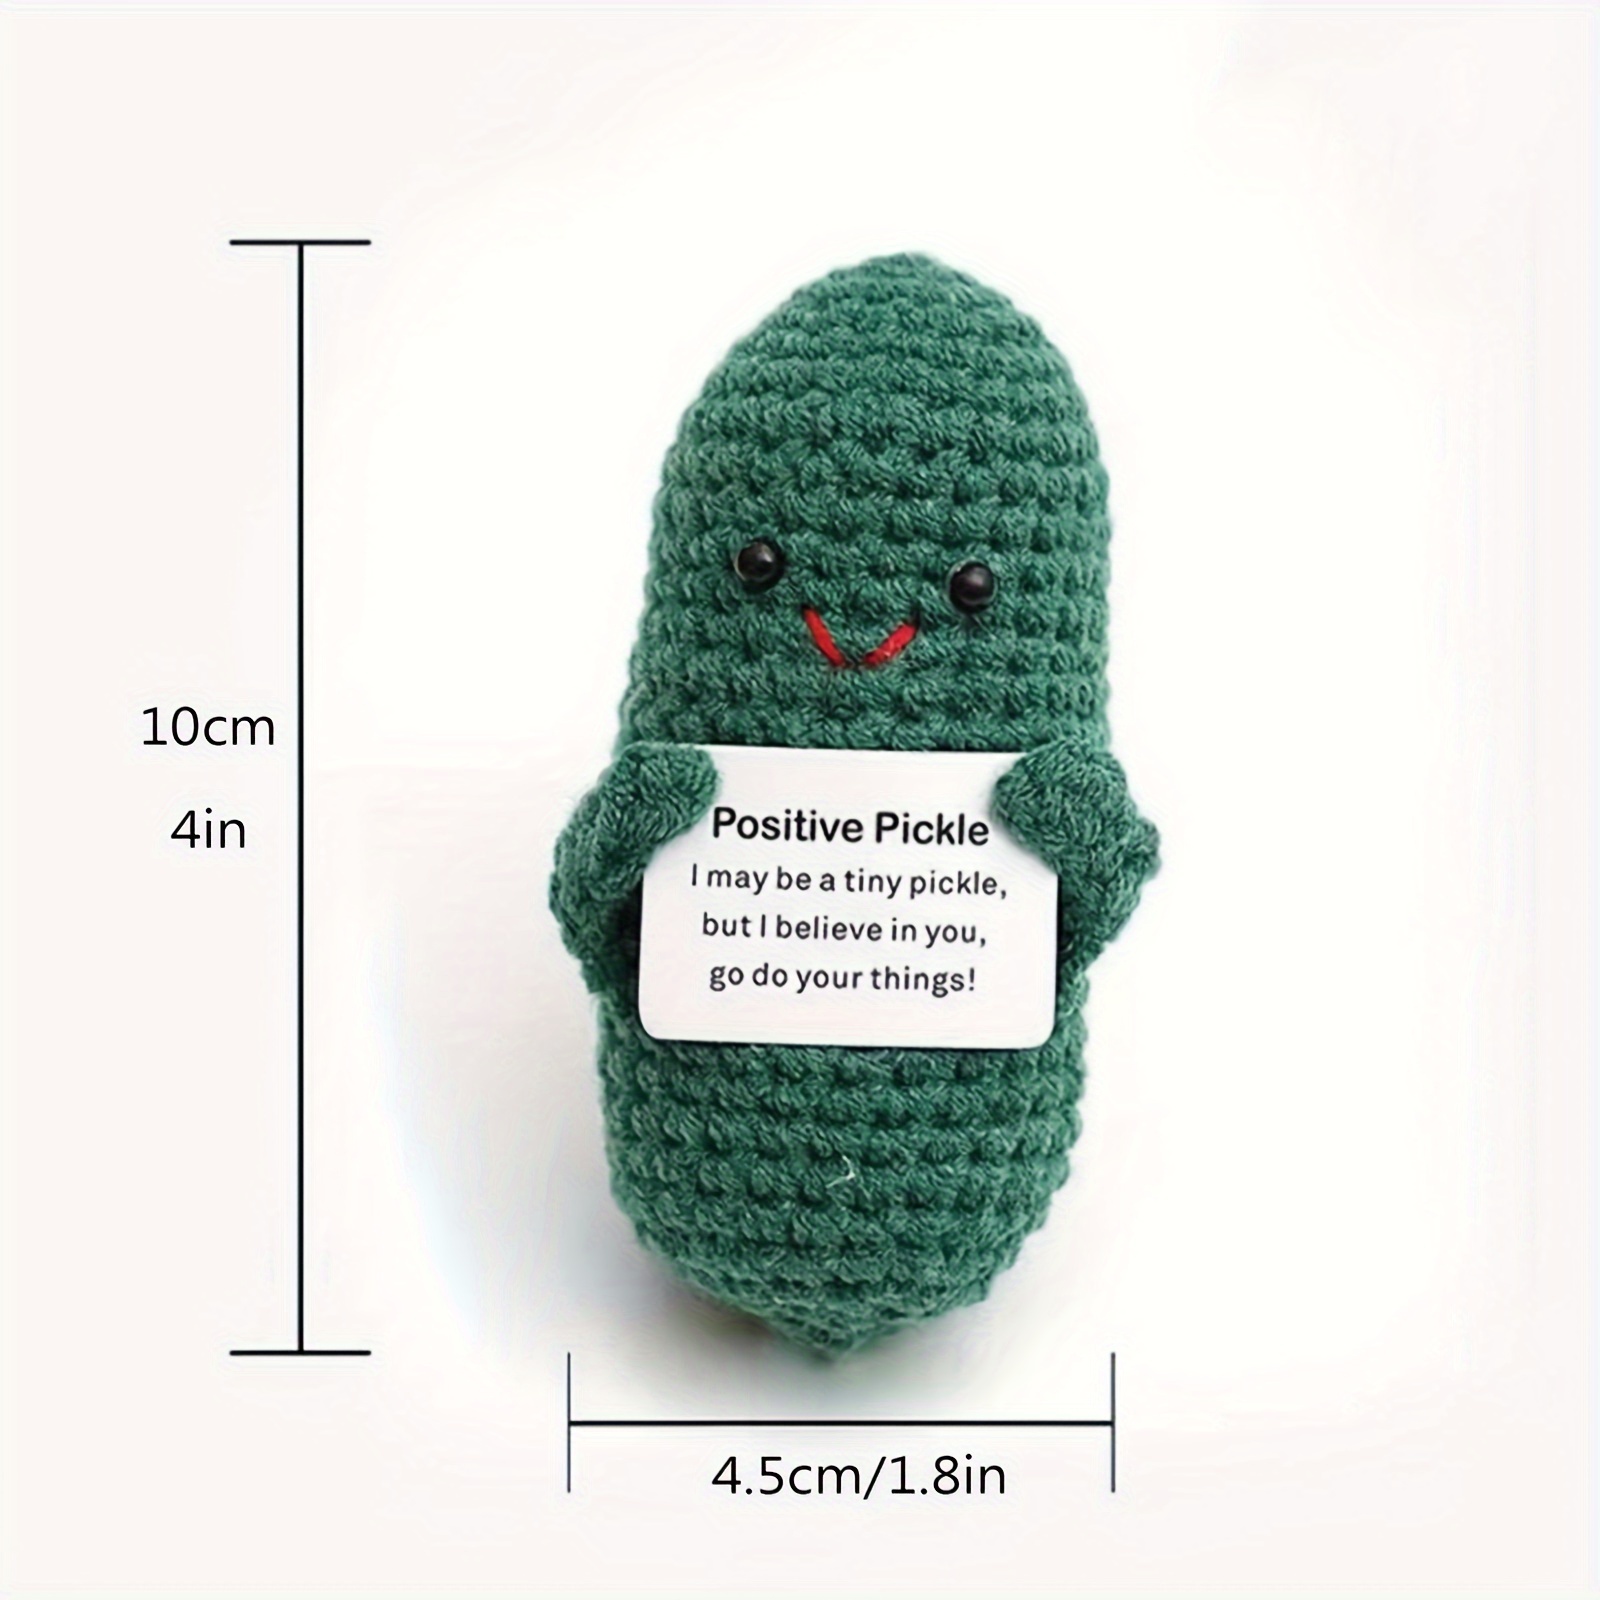 1Pcs Funny Positive Potato,Cute Wool Knitting Doll with Positive